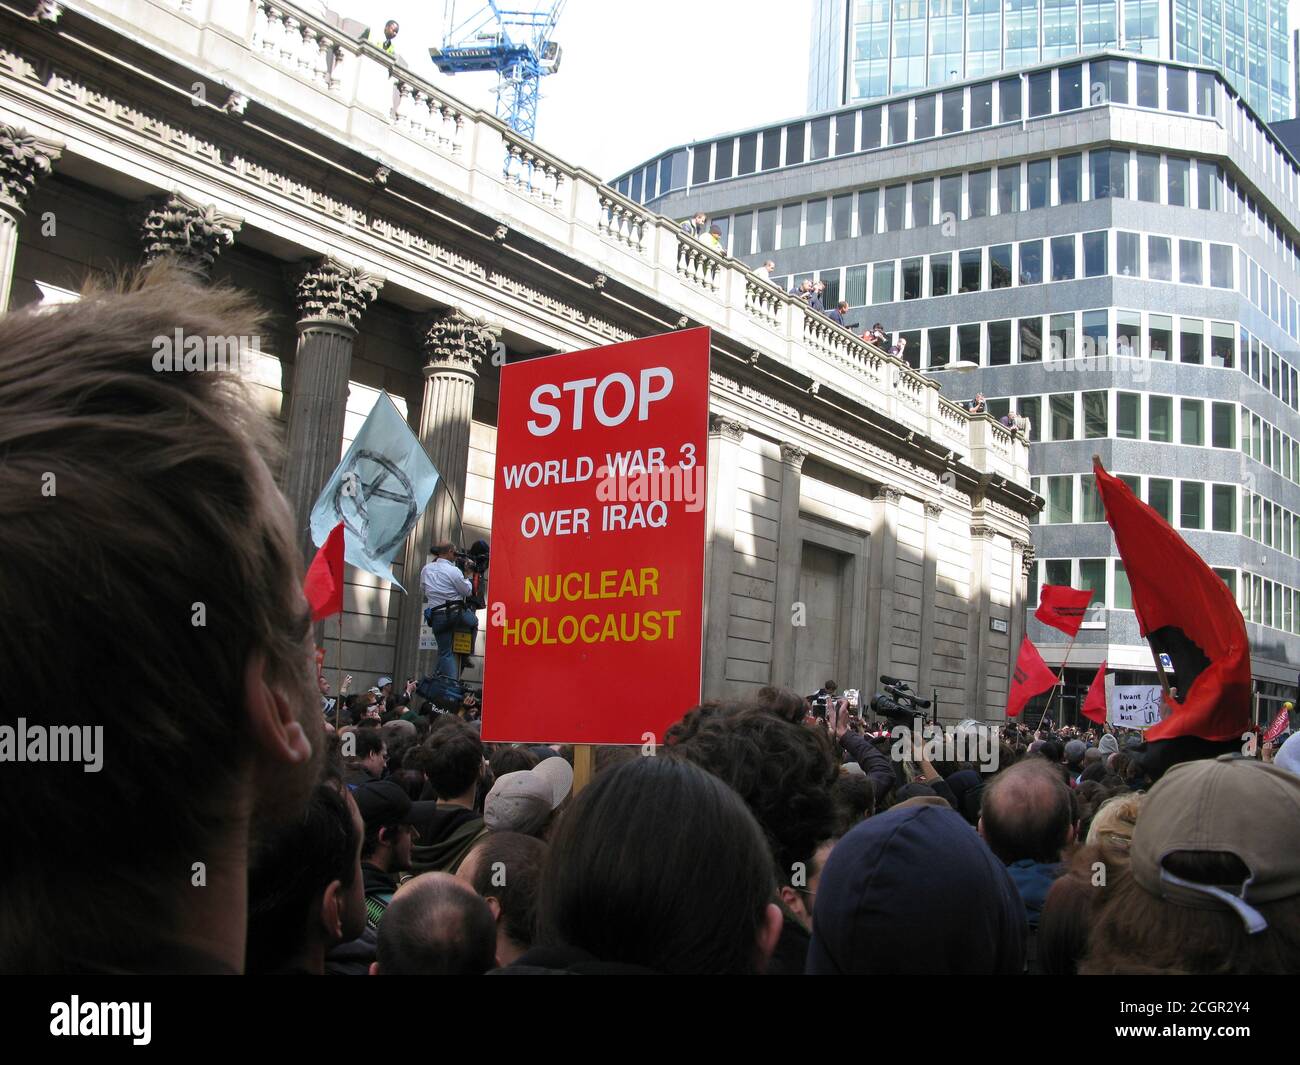 Stop world war 3 protest sign. 2009 G20 London summit protests. City of London. England. UK Stock Photo